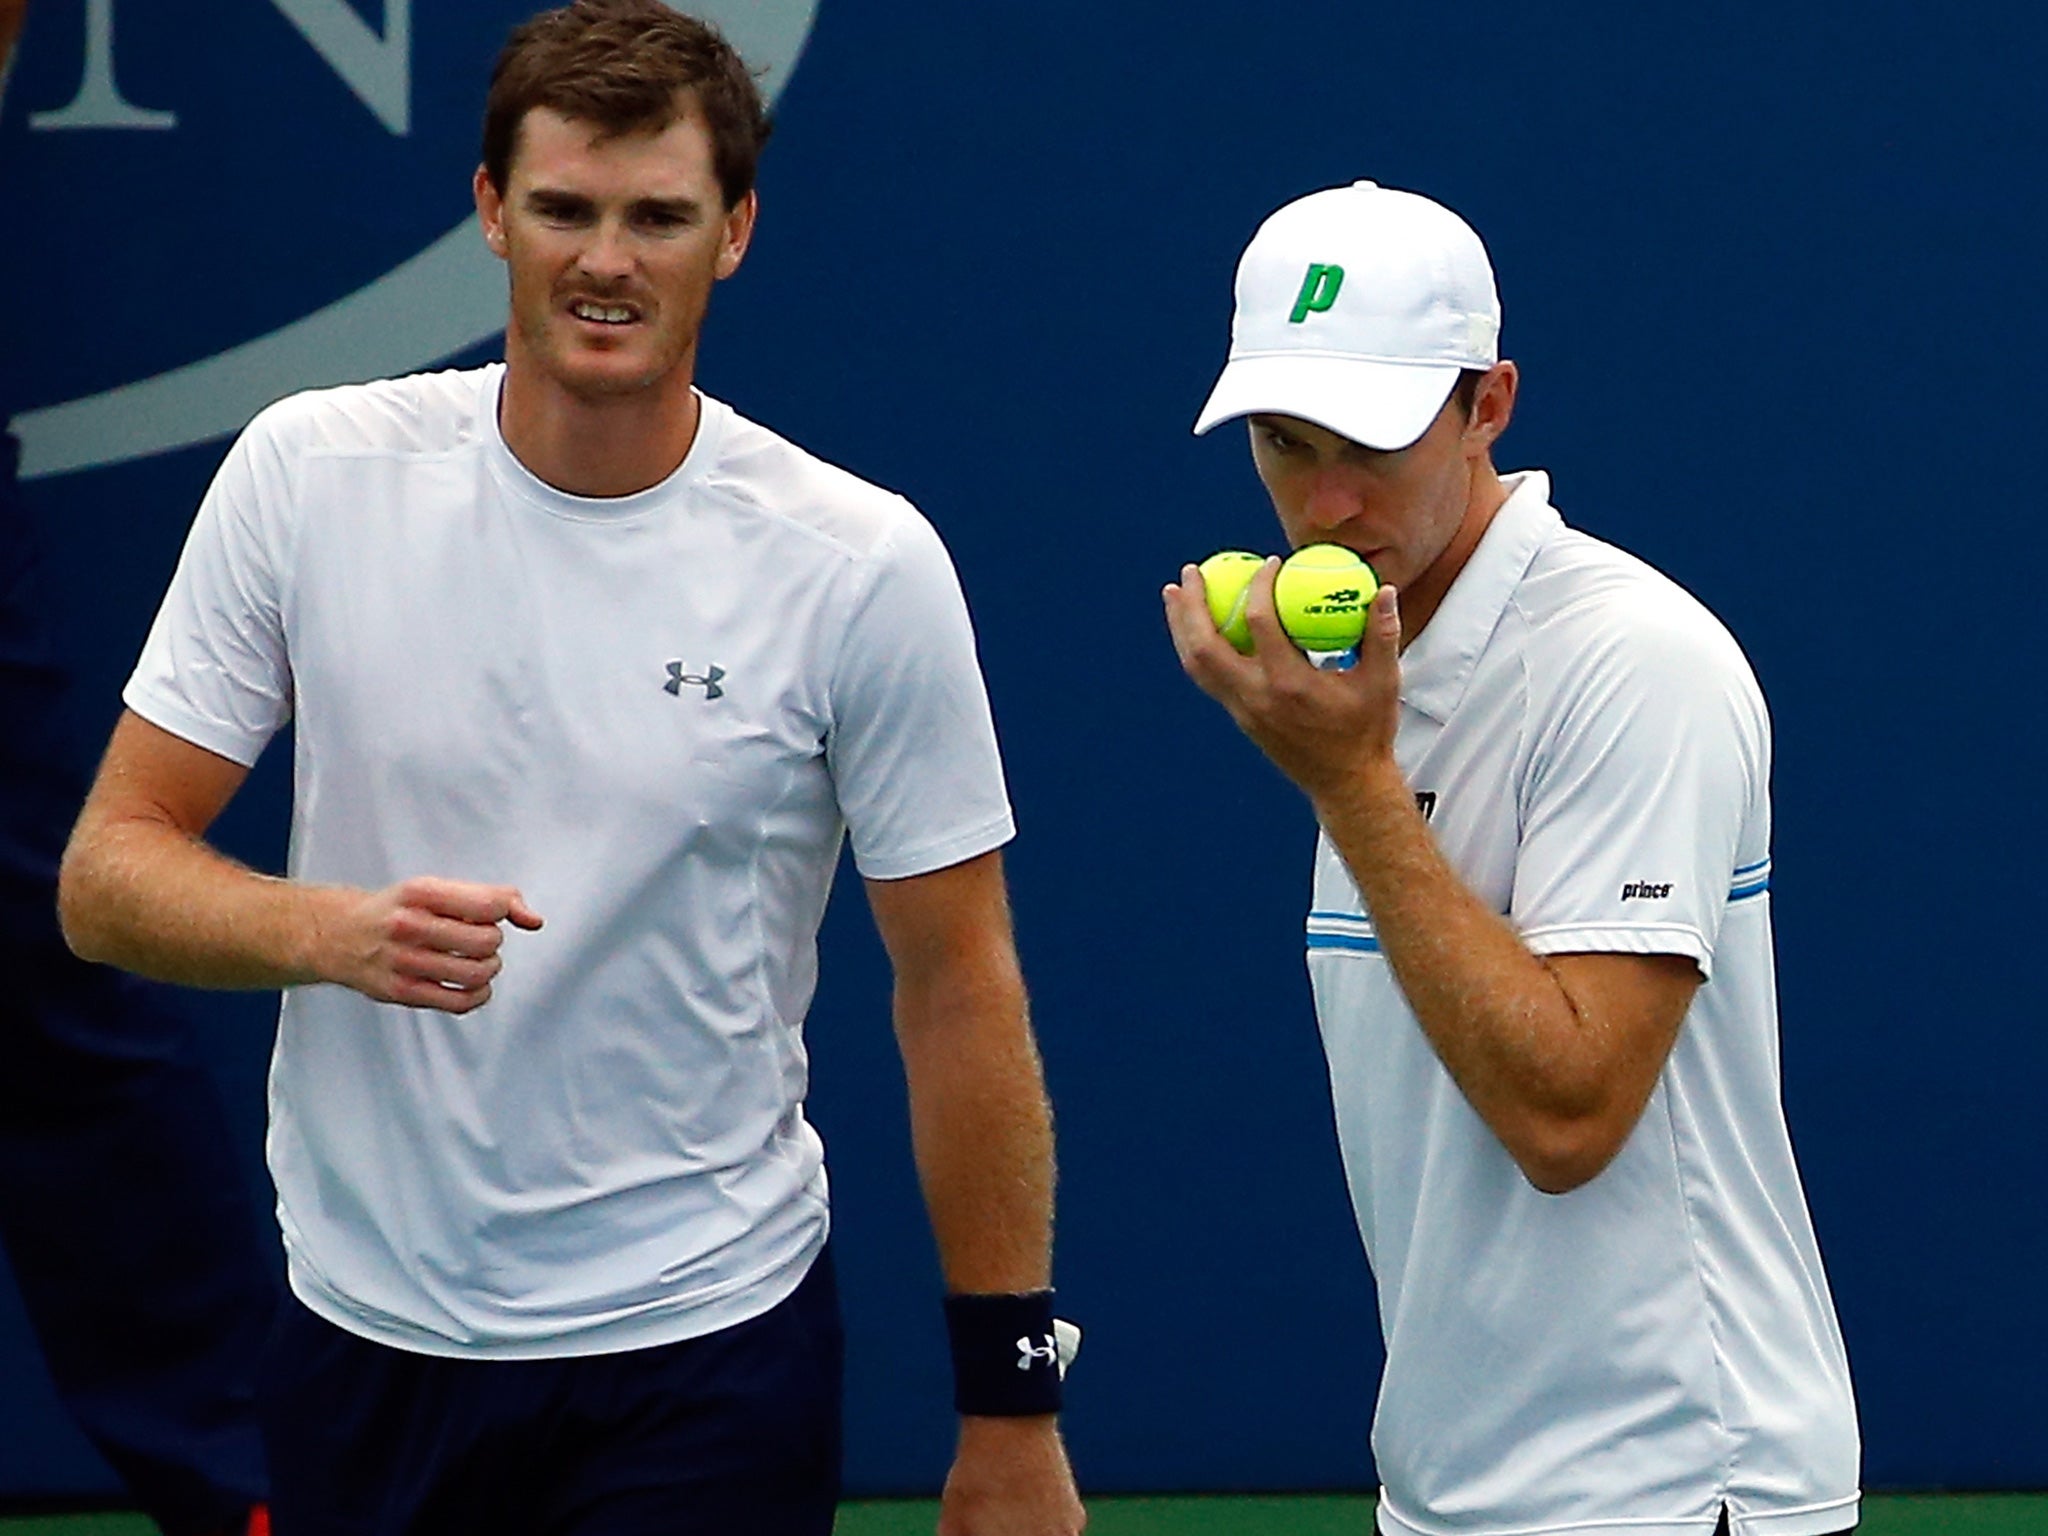 Jamie Murray and John Peers are in the US Open doubles final today